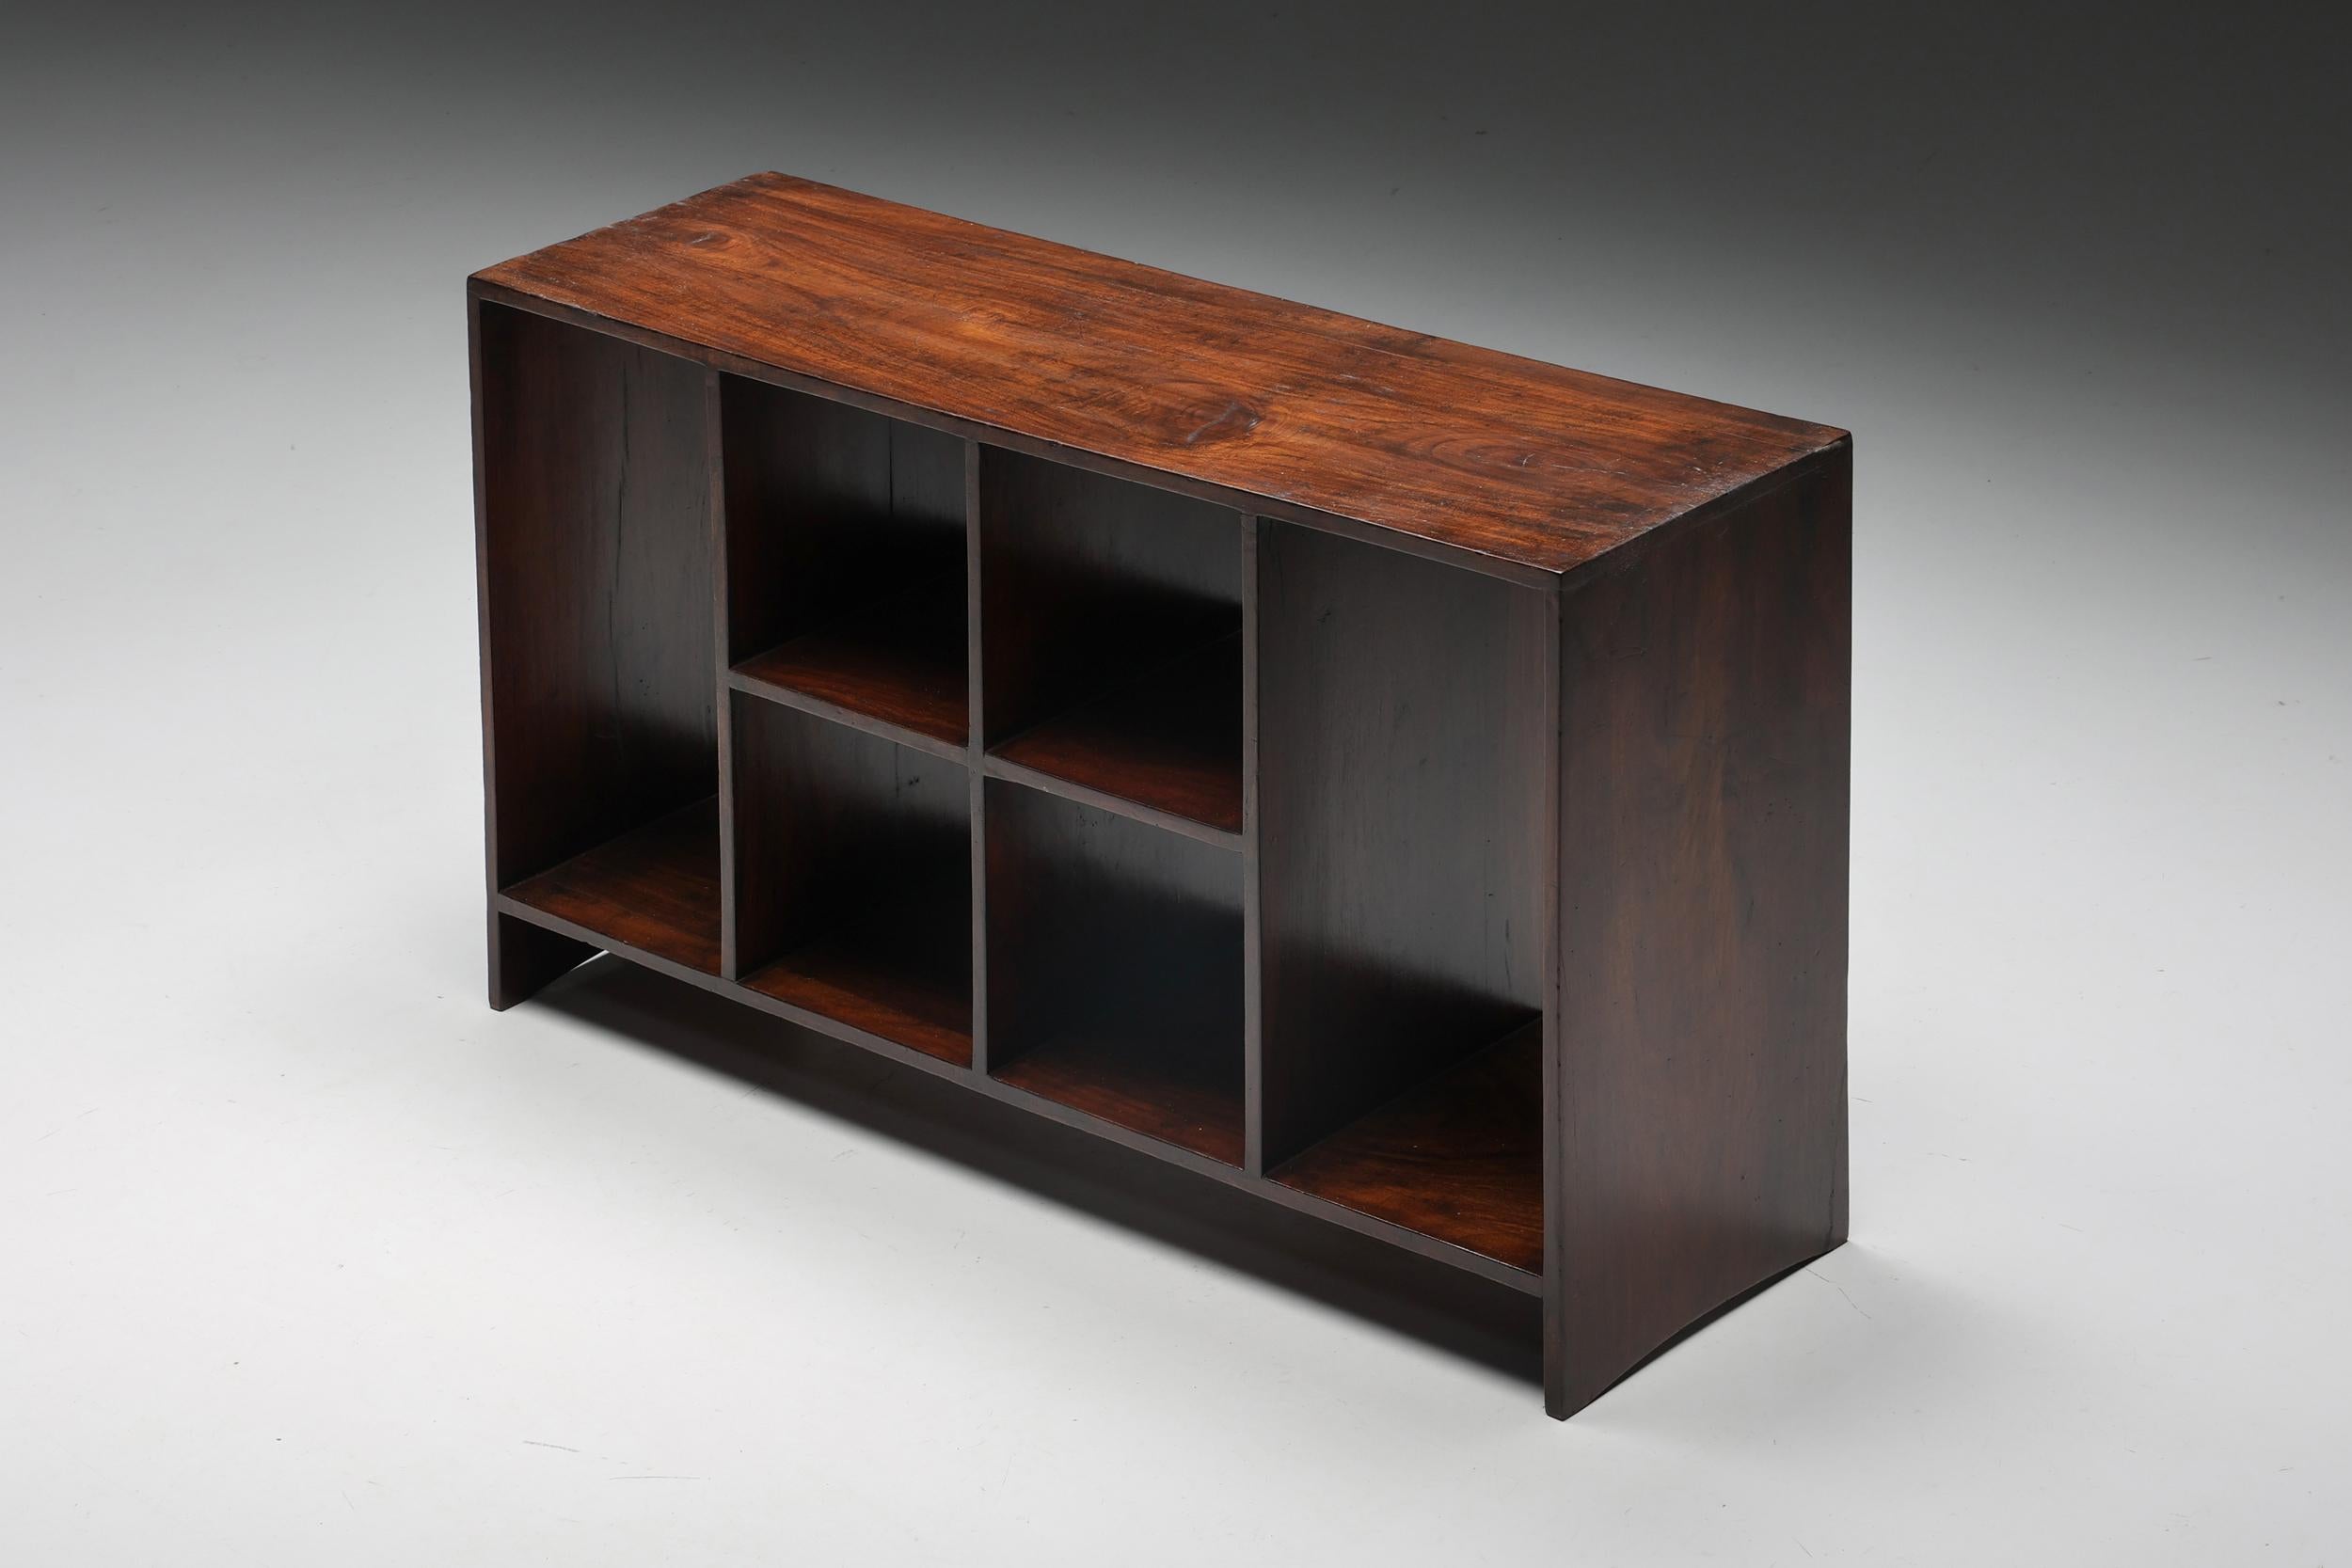 File Rack; Pierre Jeanneret; Le Corbusier; Low Cupboard; PJ-050202; Chandigarh; 1957; 1958; 1950s; India; Cabinet; Shelving Unit; Mid-Century Modern; Bookshelf; Sideboard; Room Divider;

This double-sided low cupboard, known as 